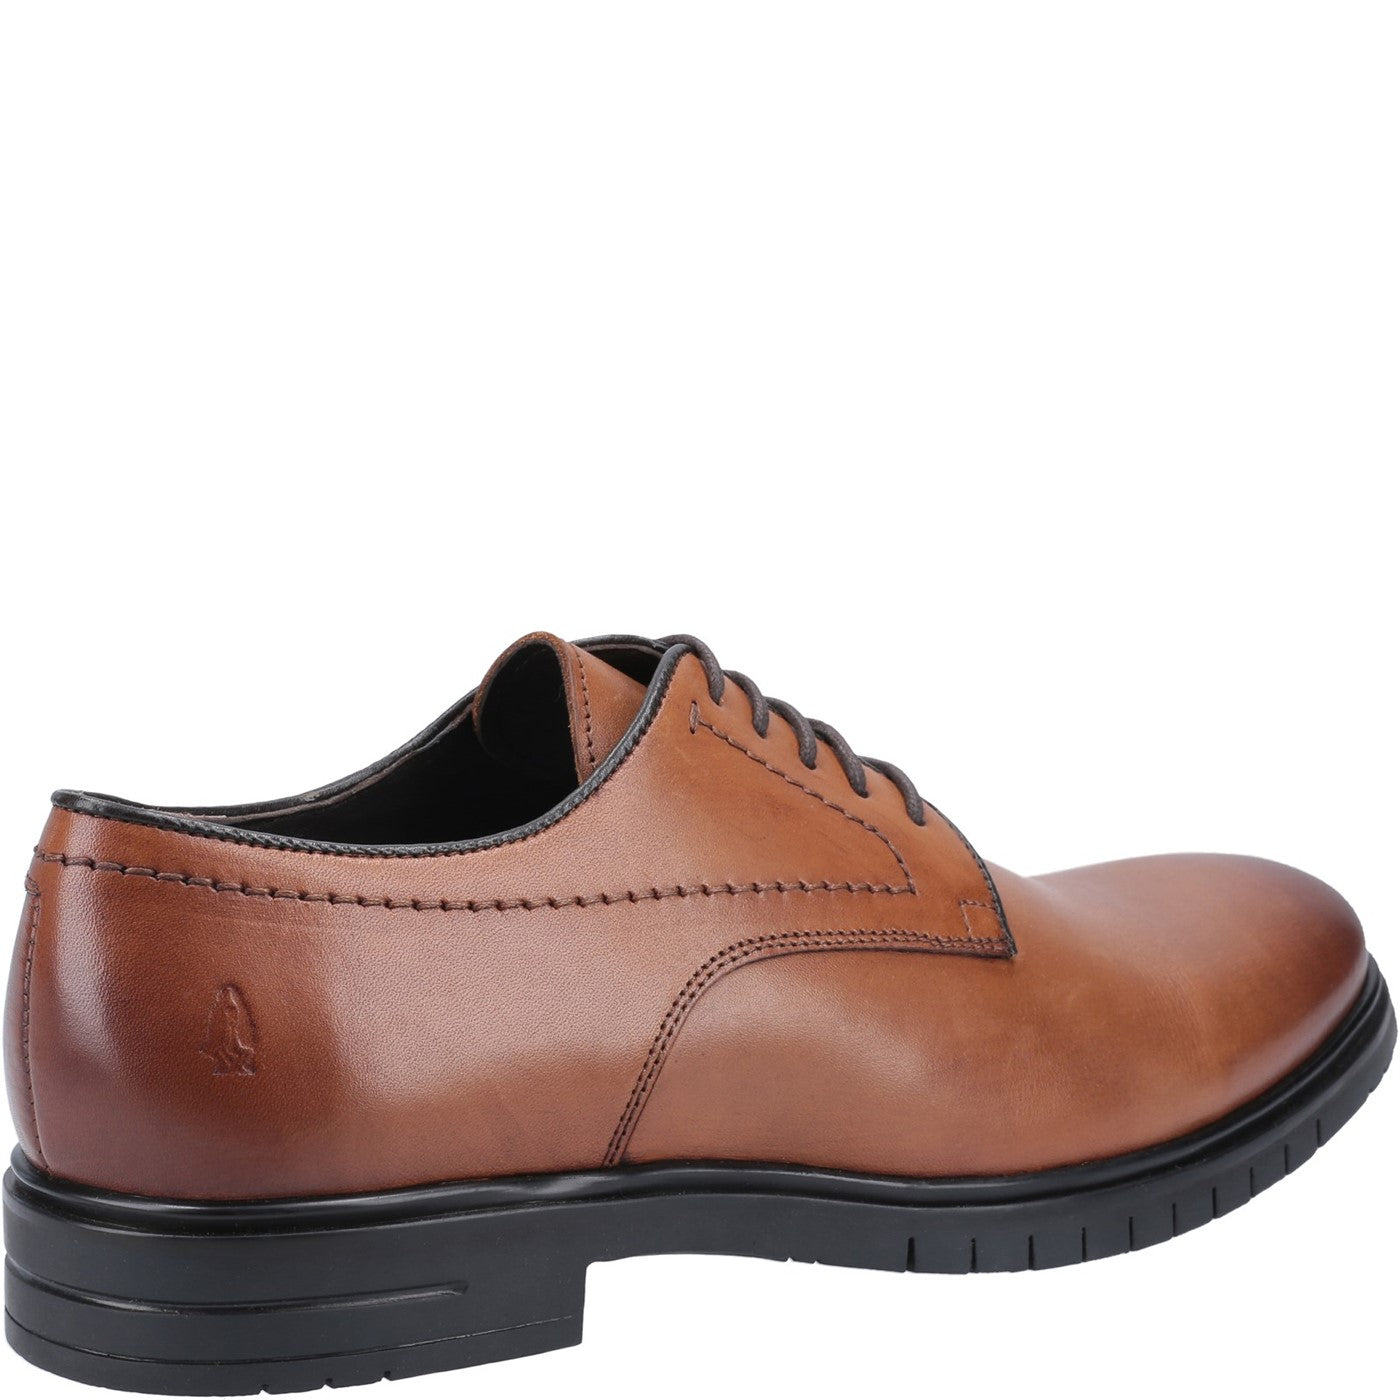 Men's Hush Puppies Sterling Lace Shoes